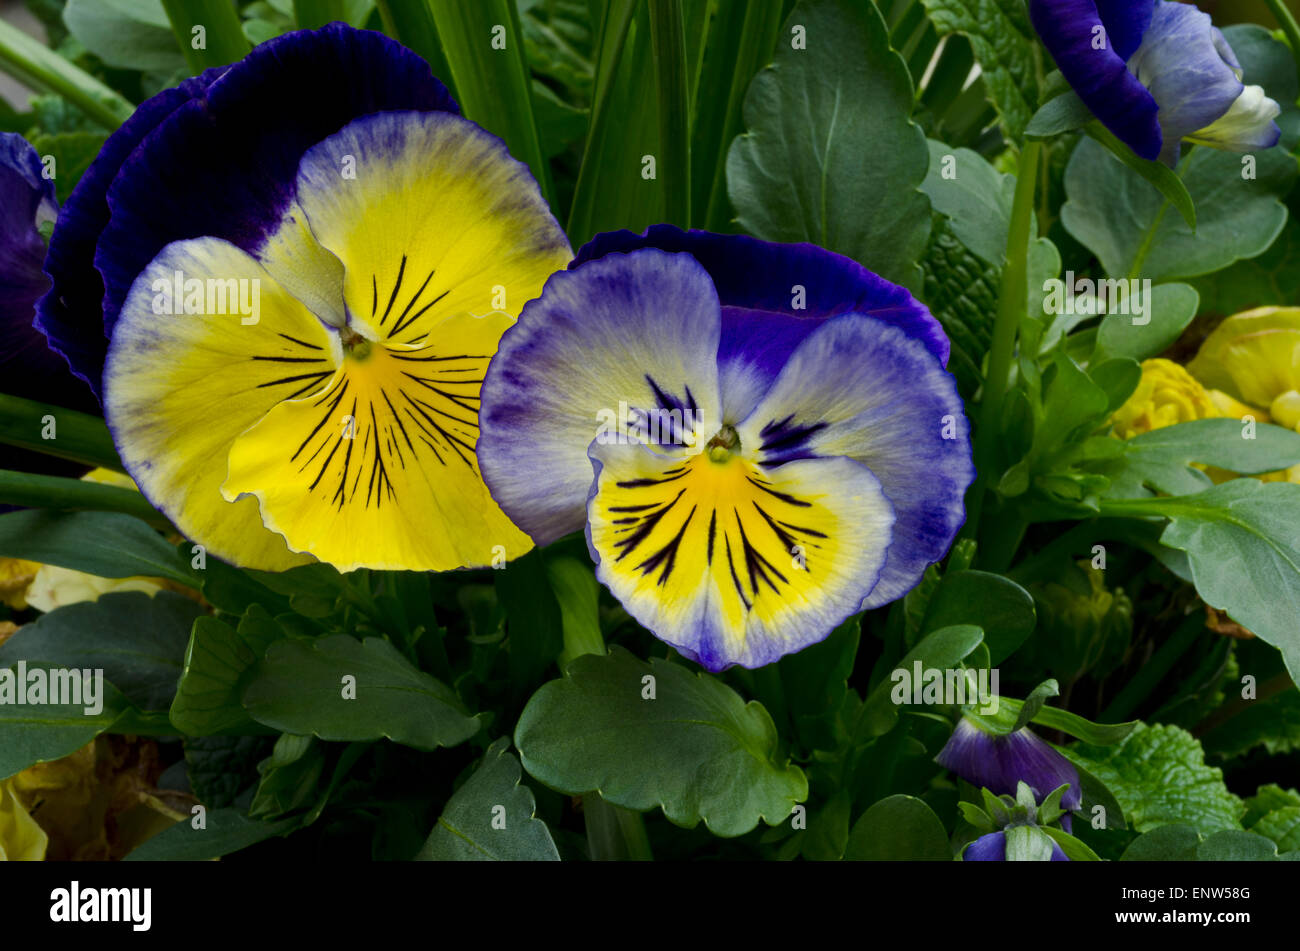 Faces of blue-yellow pansies Stock Photo